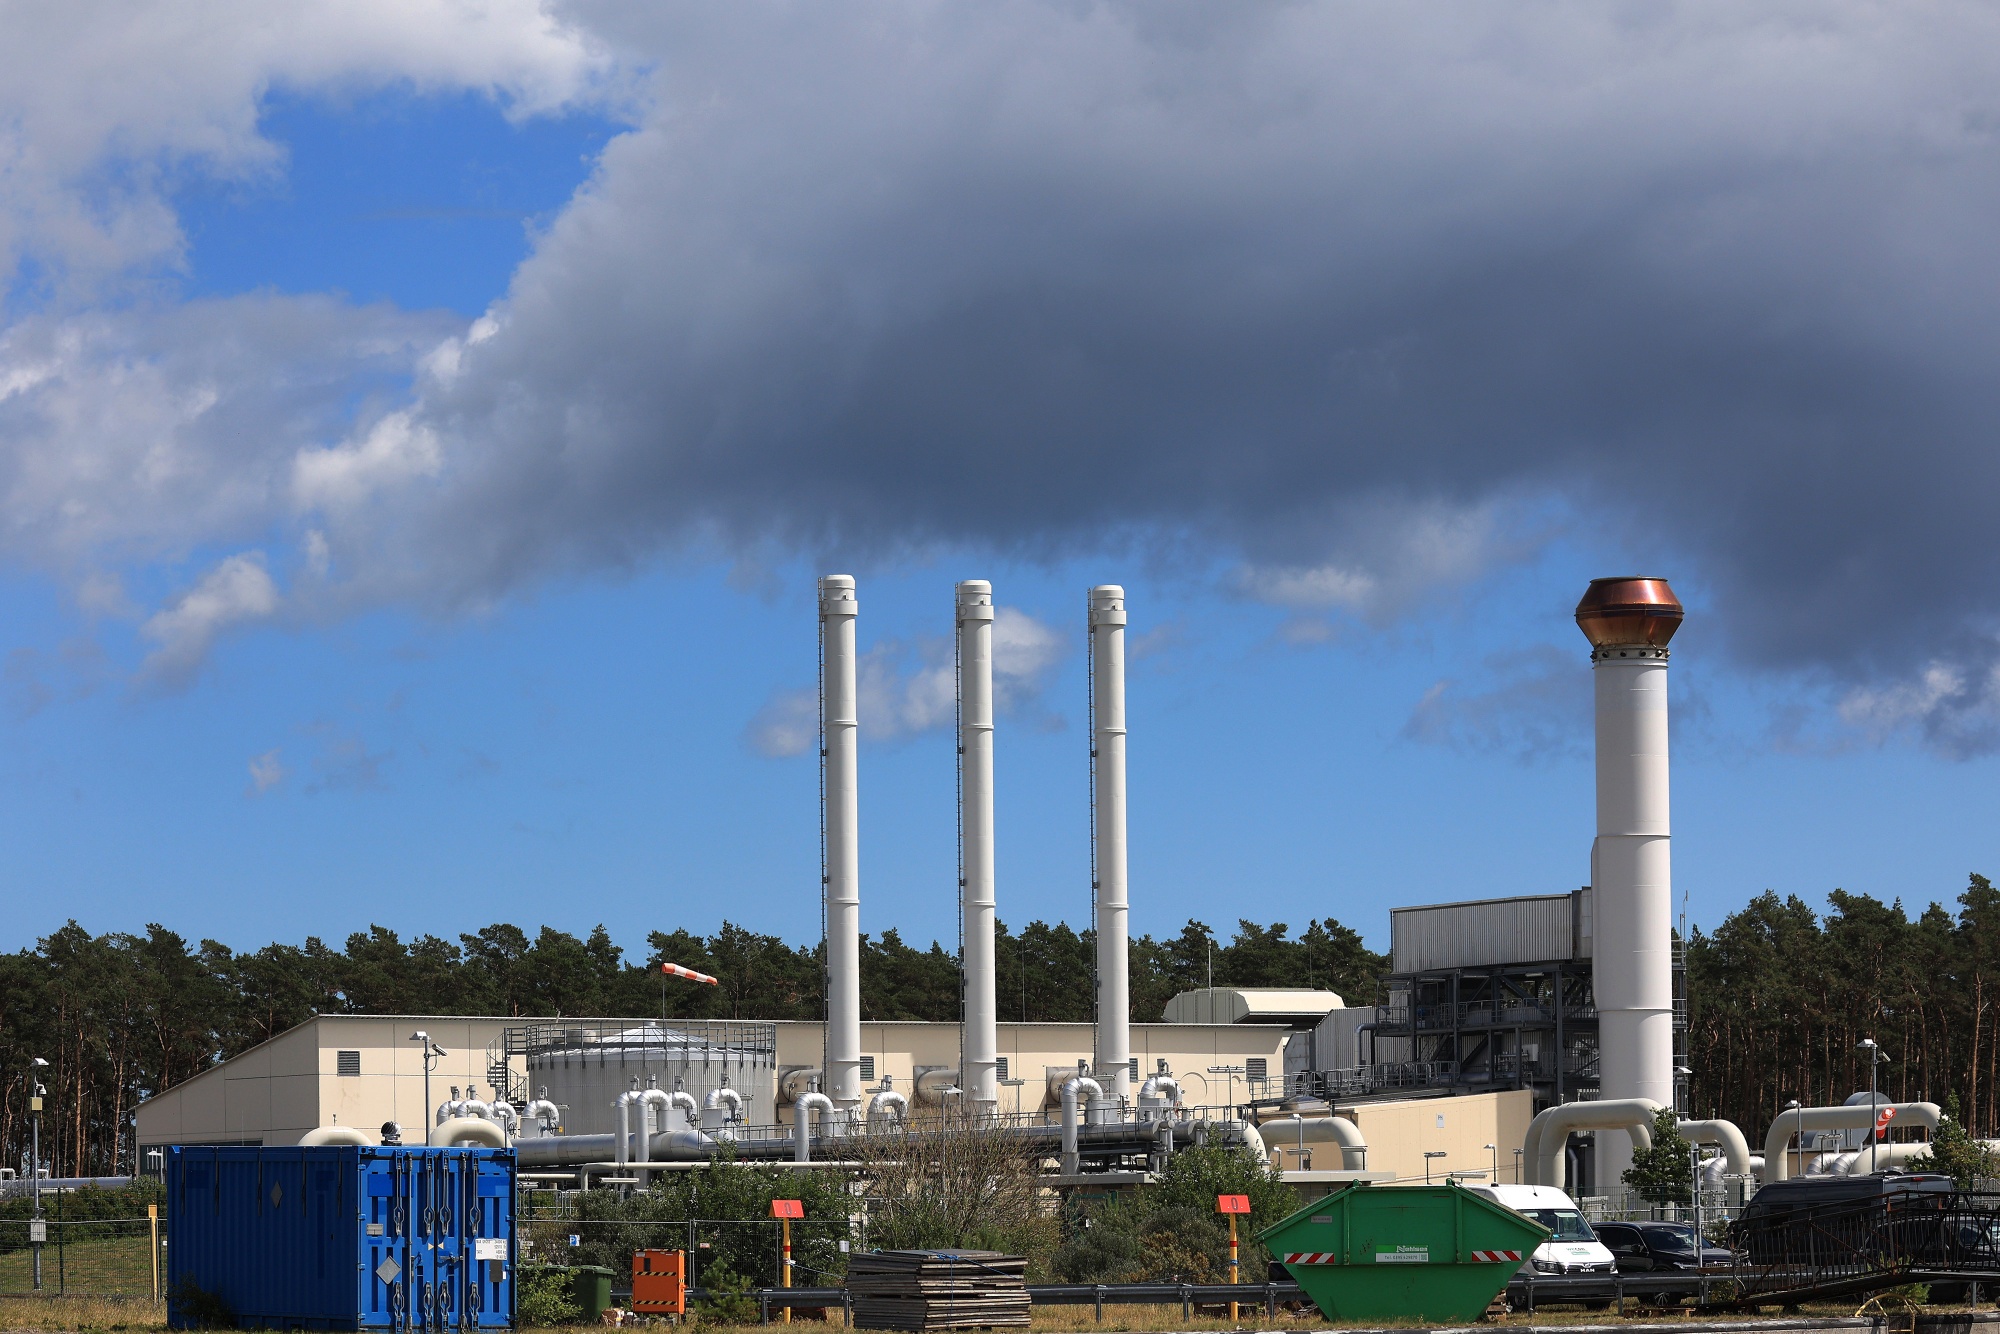 An energy plant in the EU.